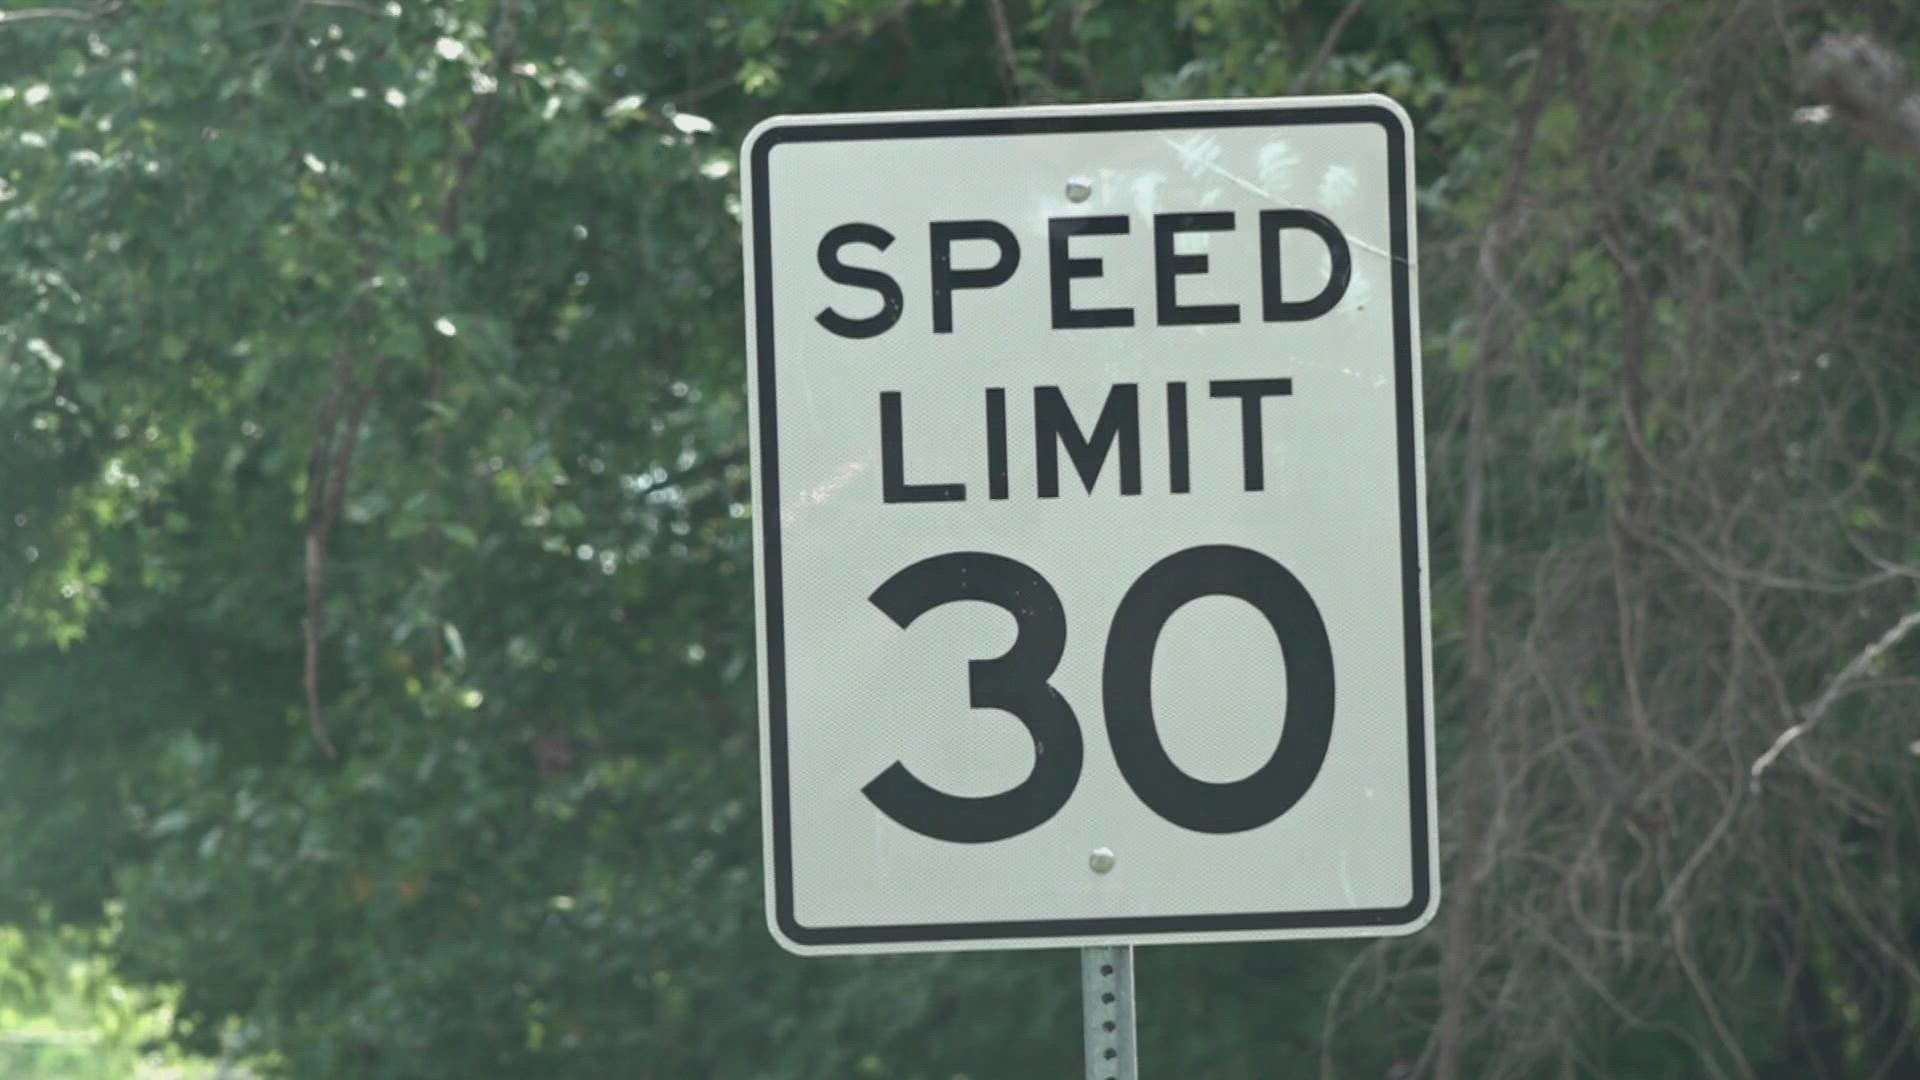 Neighbors are pushing for traffic calming measures, such as a radar speed sign or more law enforcement presence.